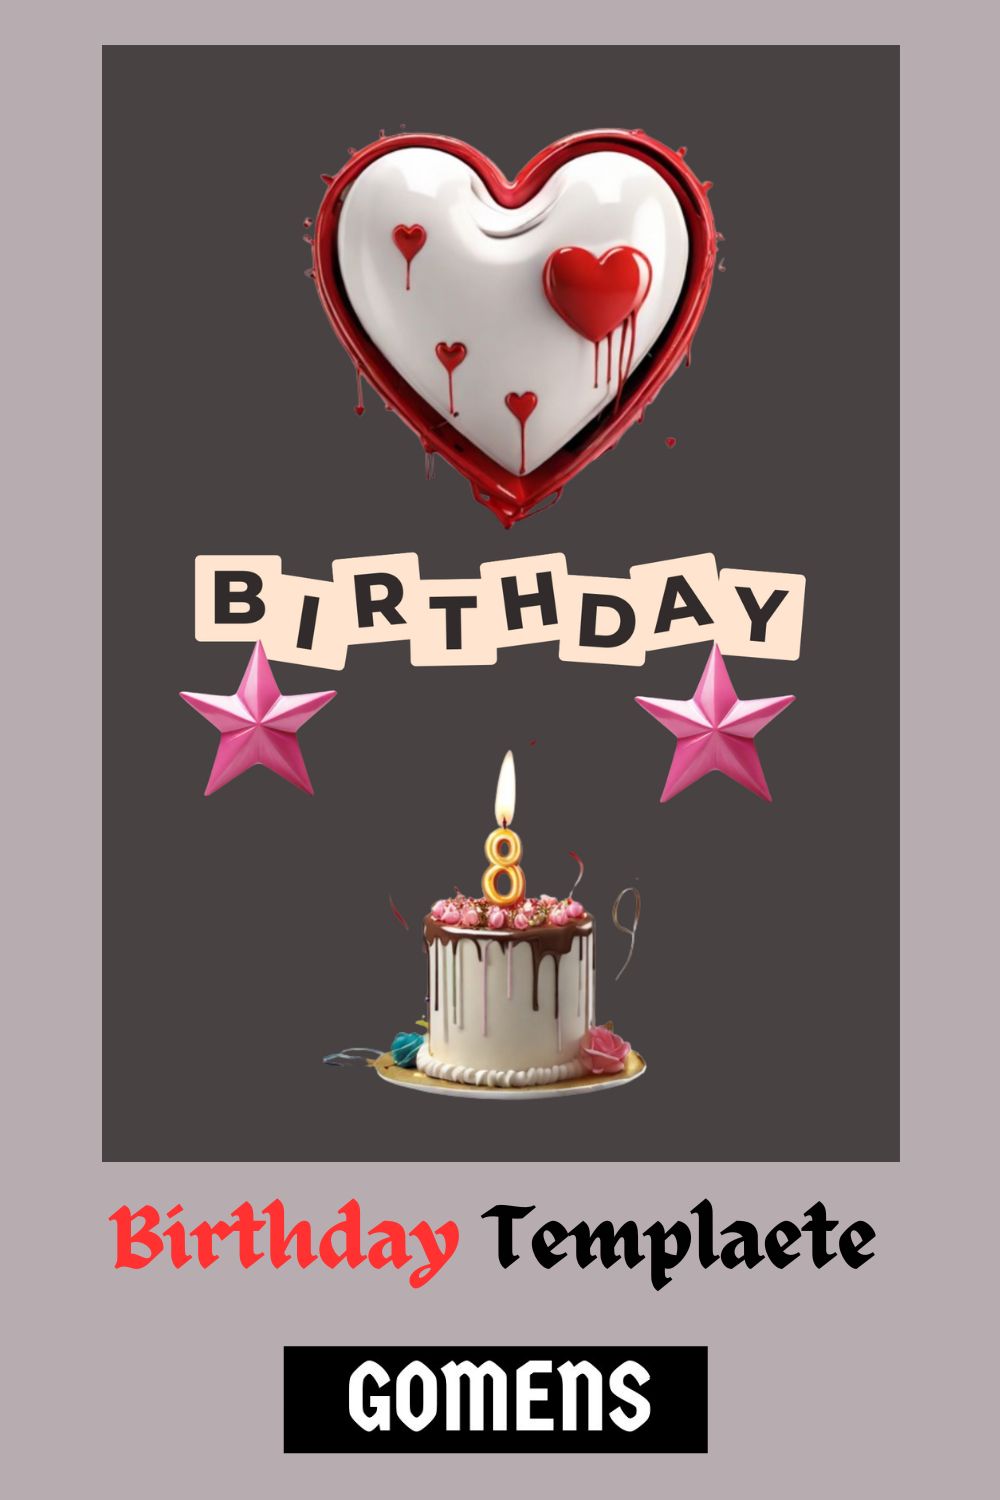 Birthday template trending in worldwide / Europe / USA pinterest preview image.